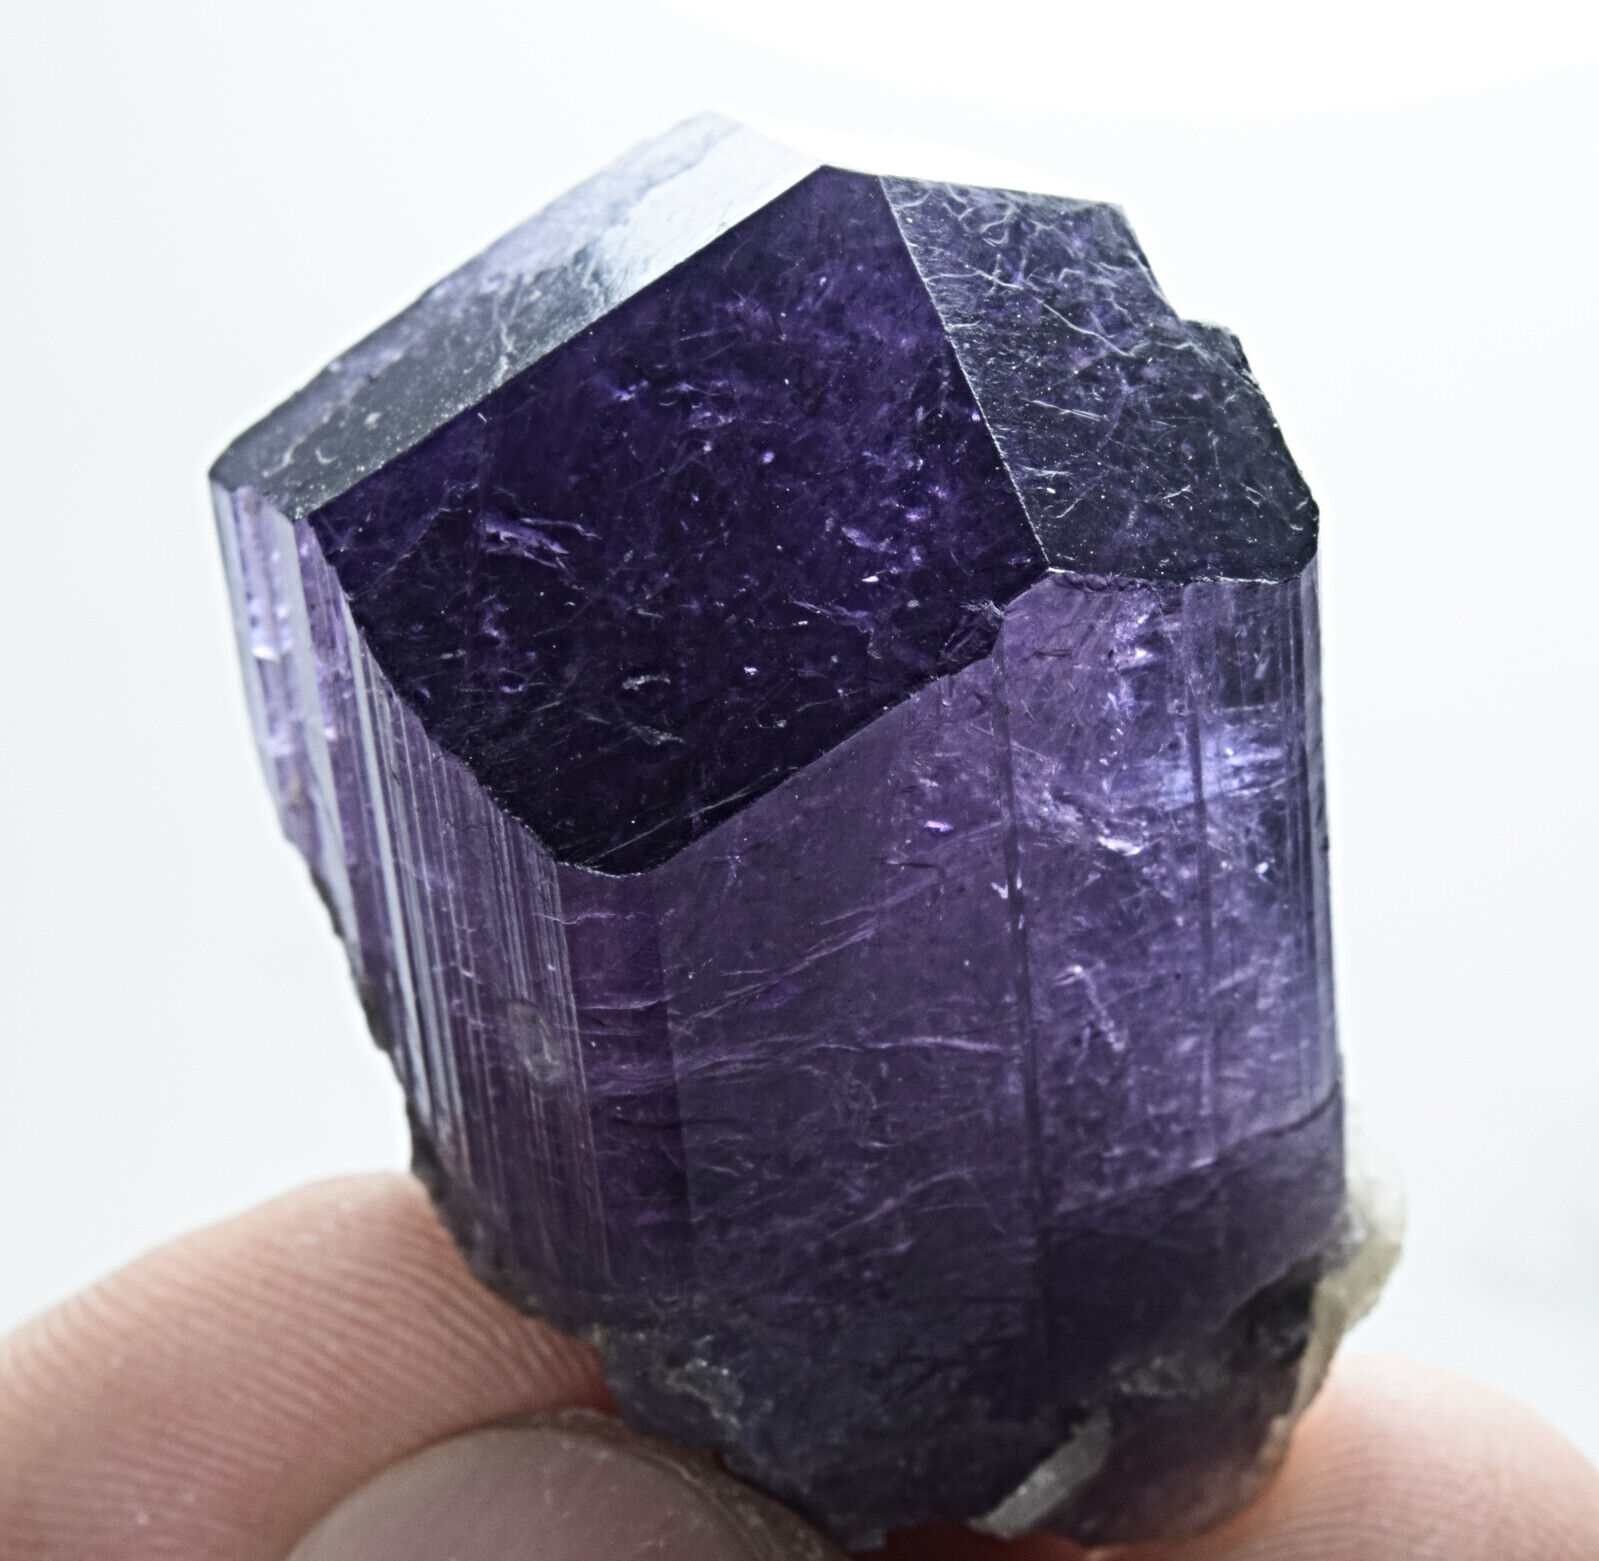 Top Quality Fluorescent Terminated Violet Purple Scapolite Crystal 155 Carat